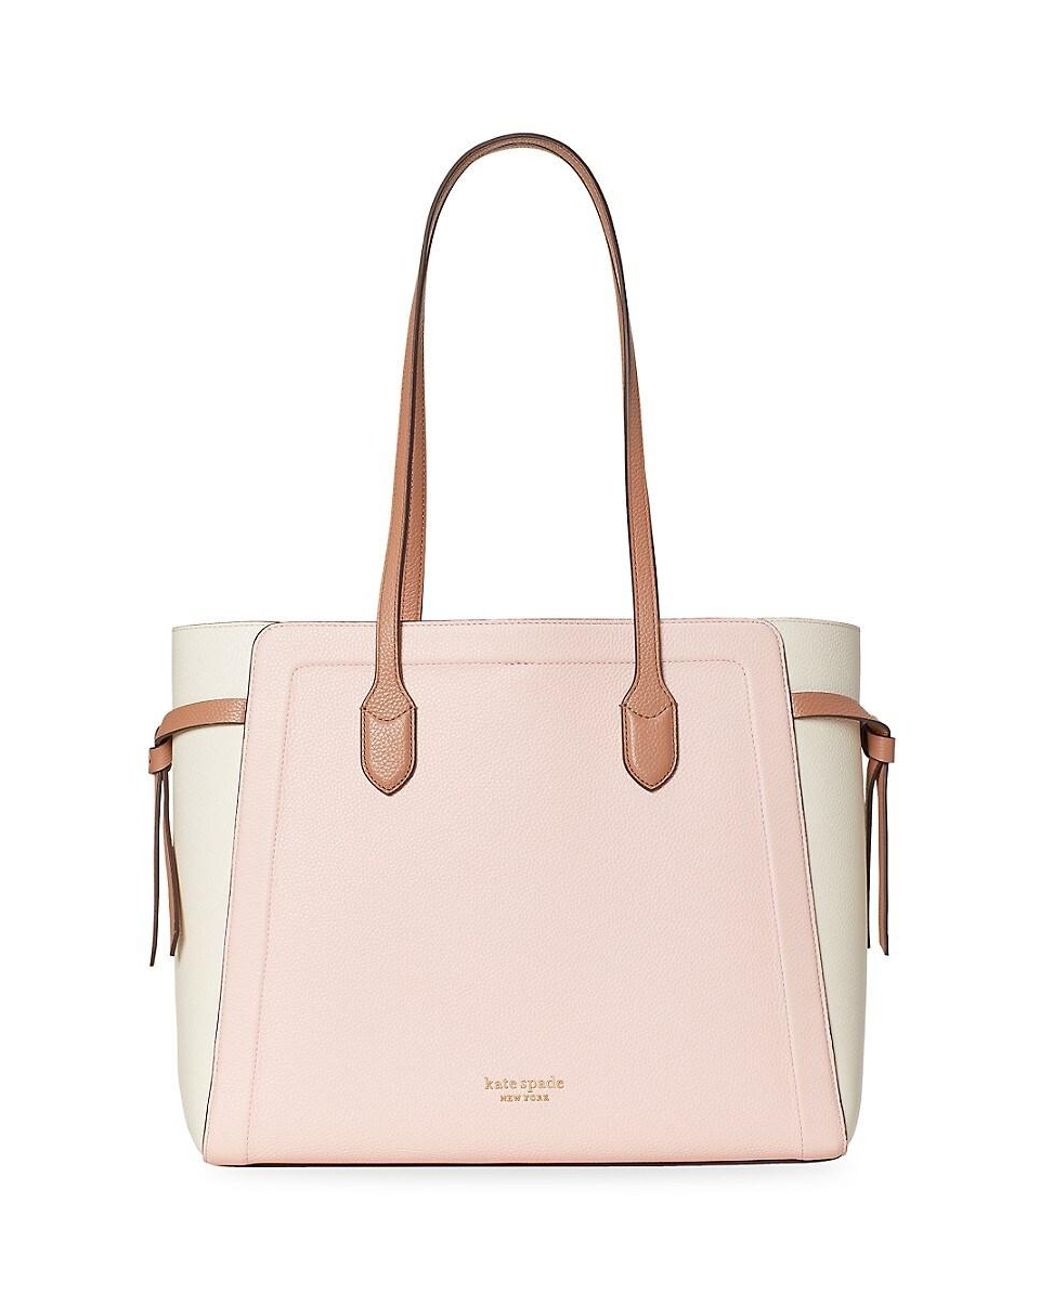 Kate Spade Knott Large Leather Tote in Pink